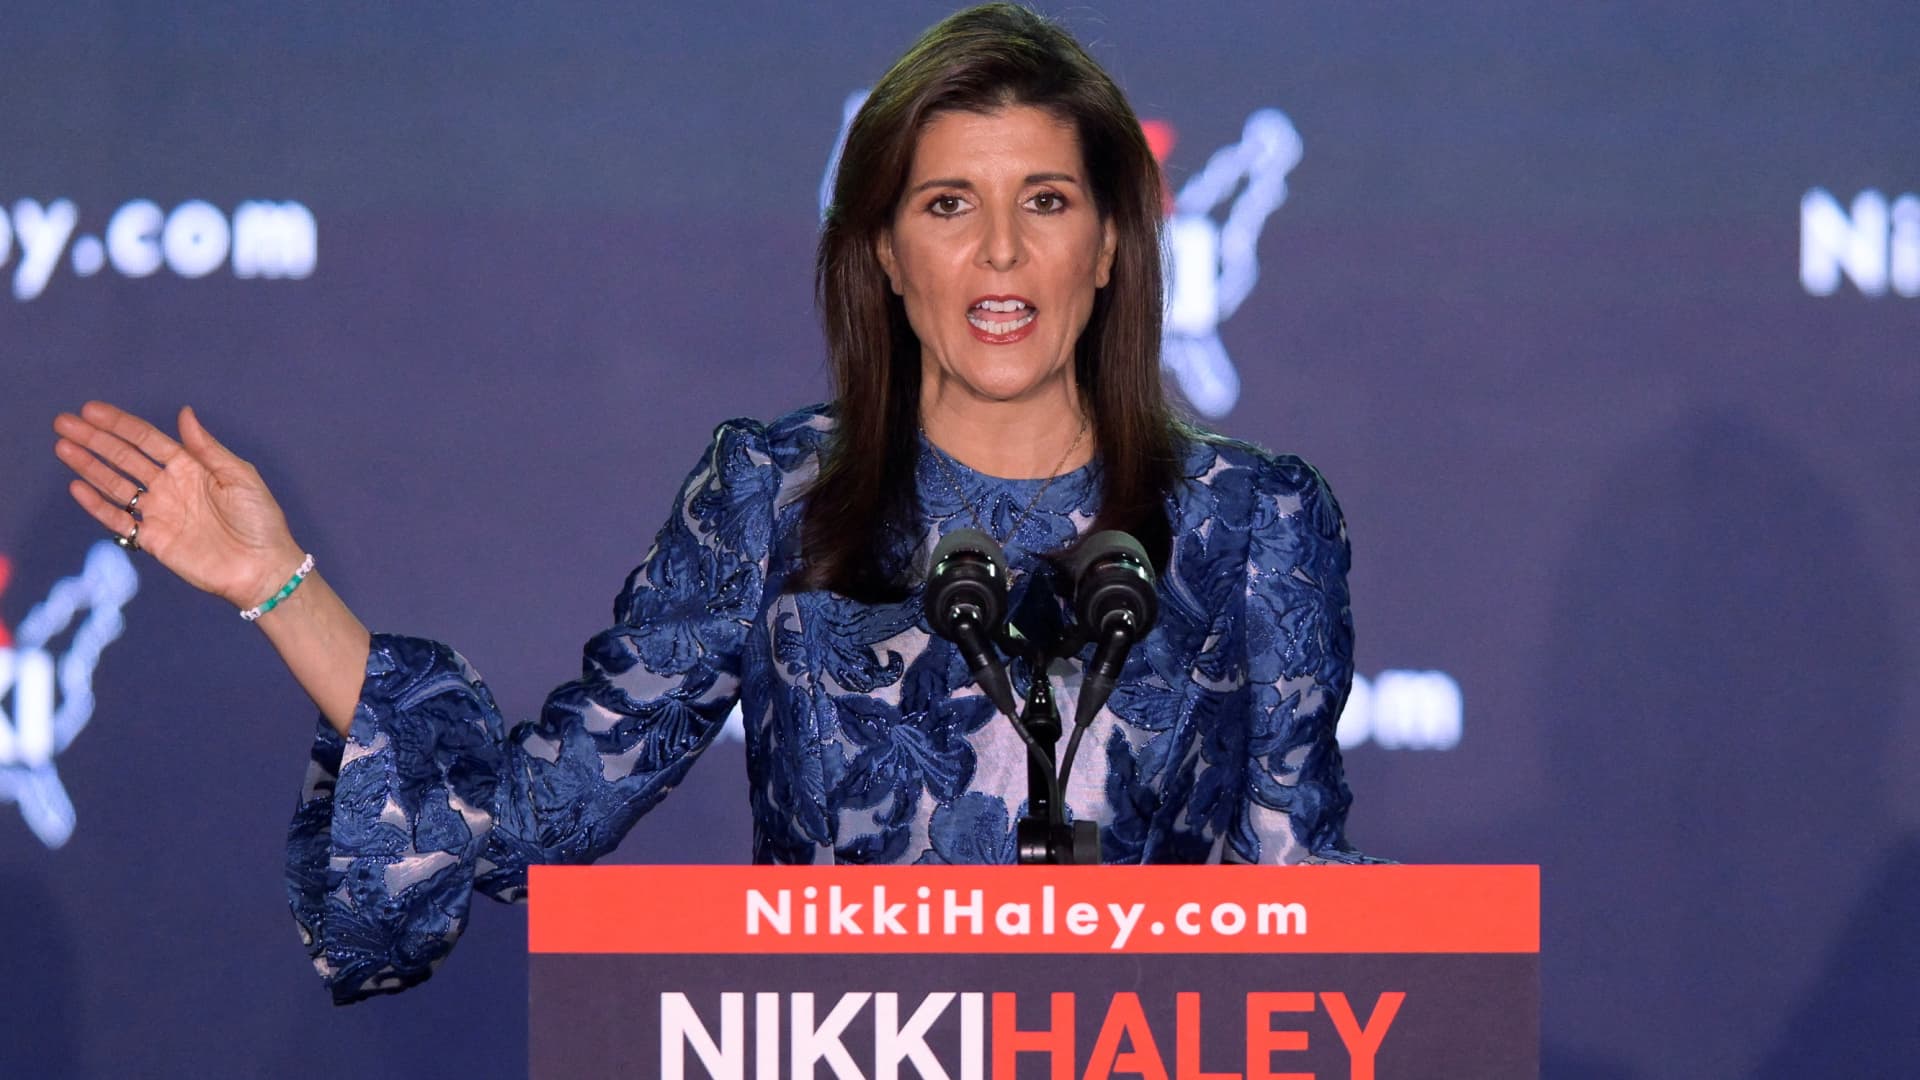 Haley campaign started election year with $14 million, after raising $17 million last quarter